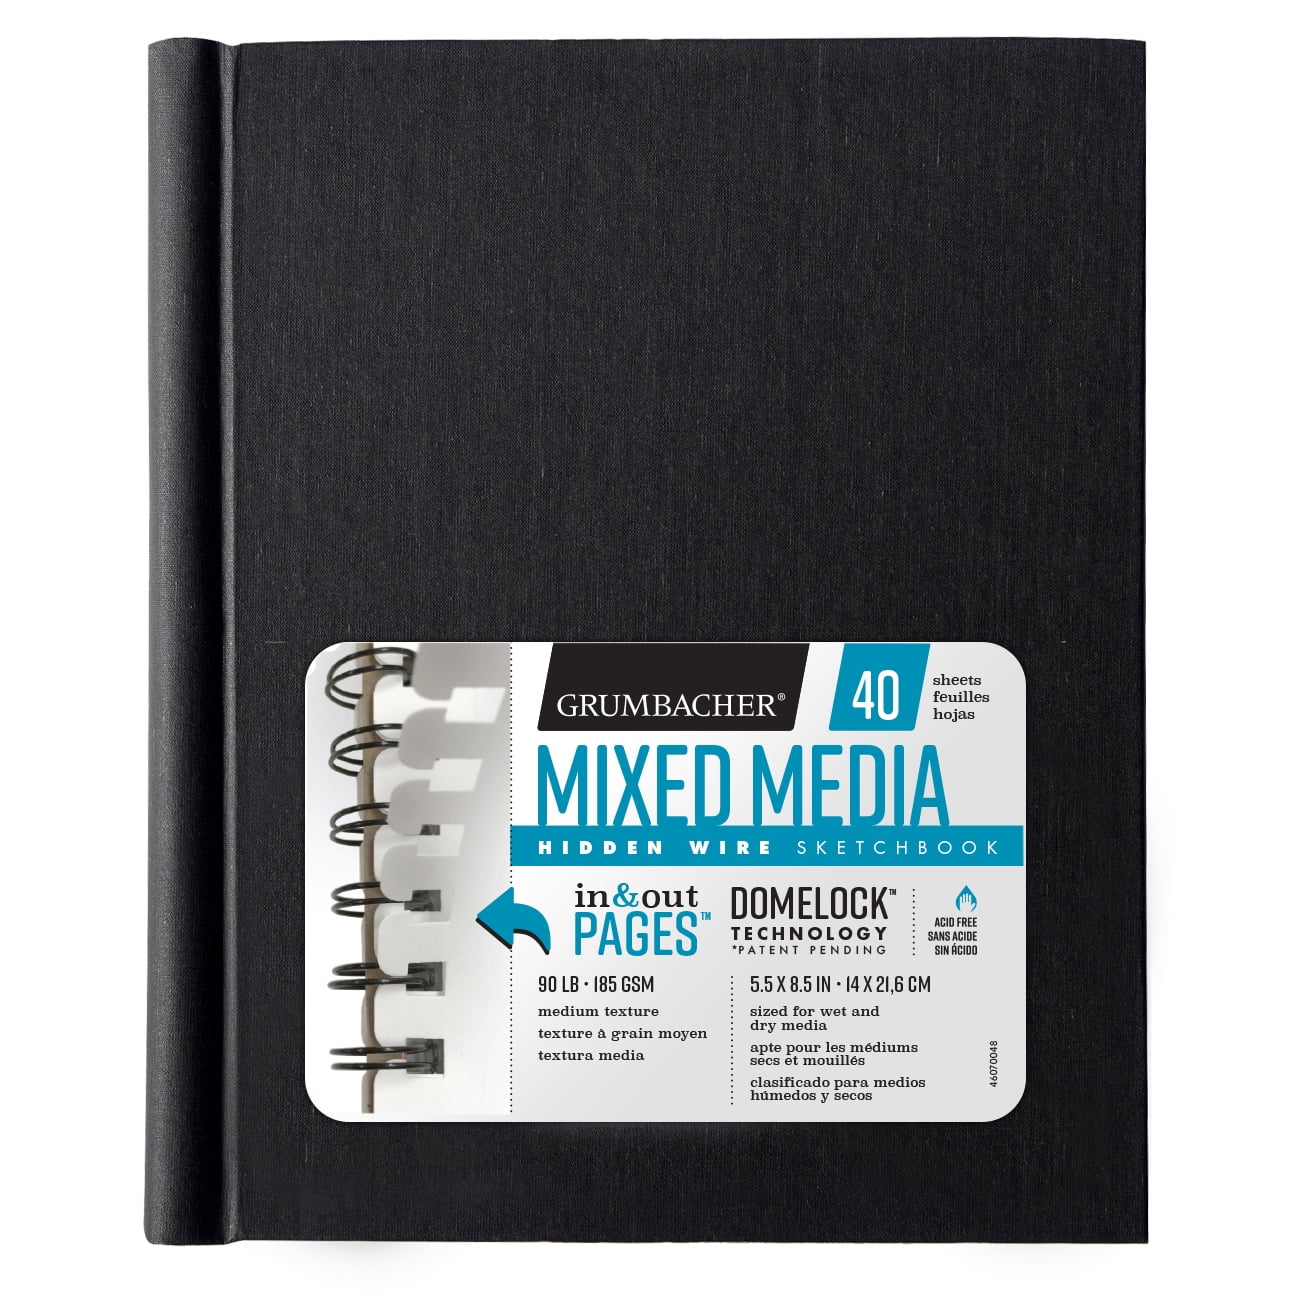 Mini Sketchbook, 3.5 x 5.5, 88 Pages - Pack of 2 –